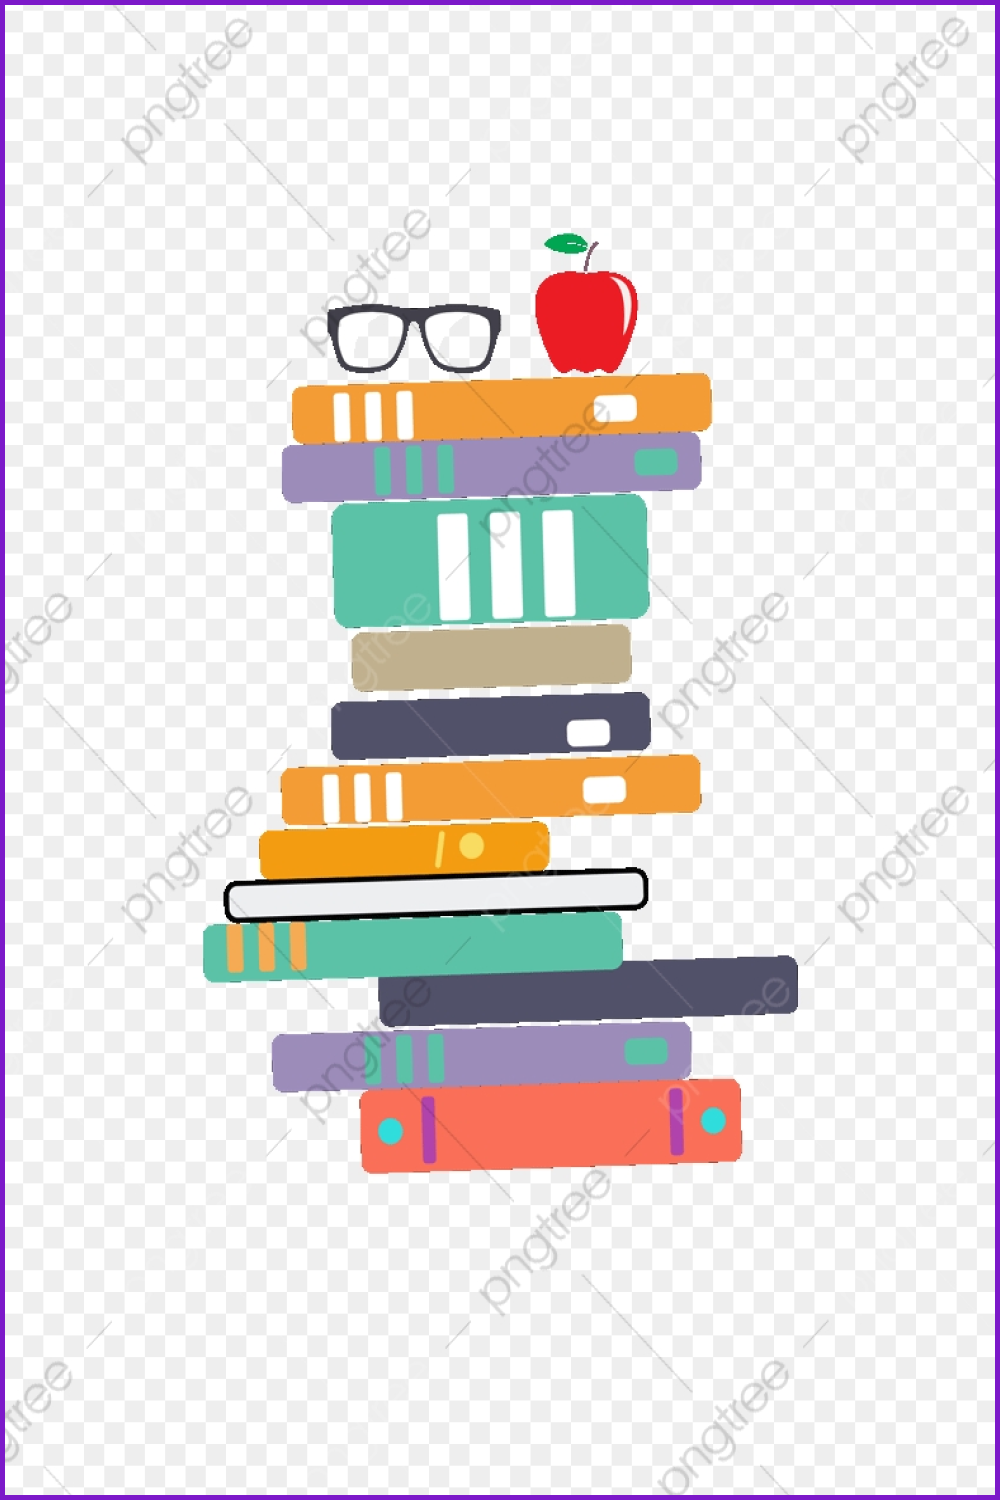 Stack of thick drawn colorful books with glasses and apples.